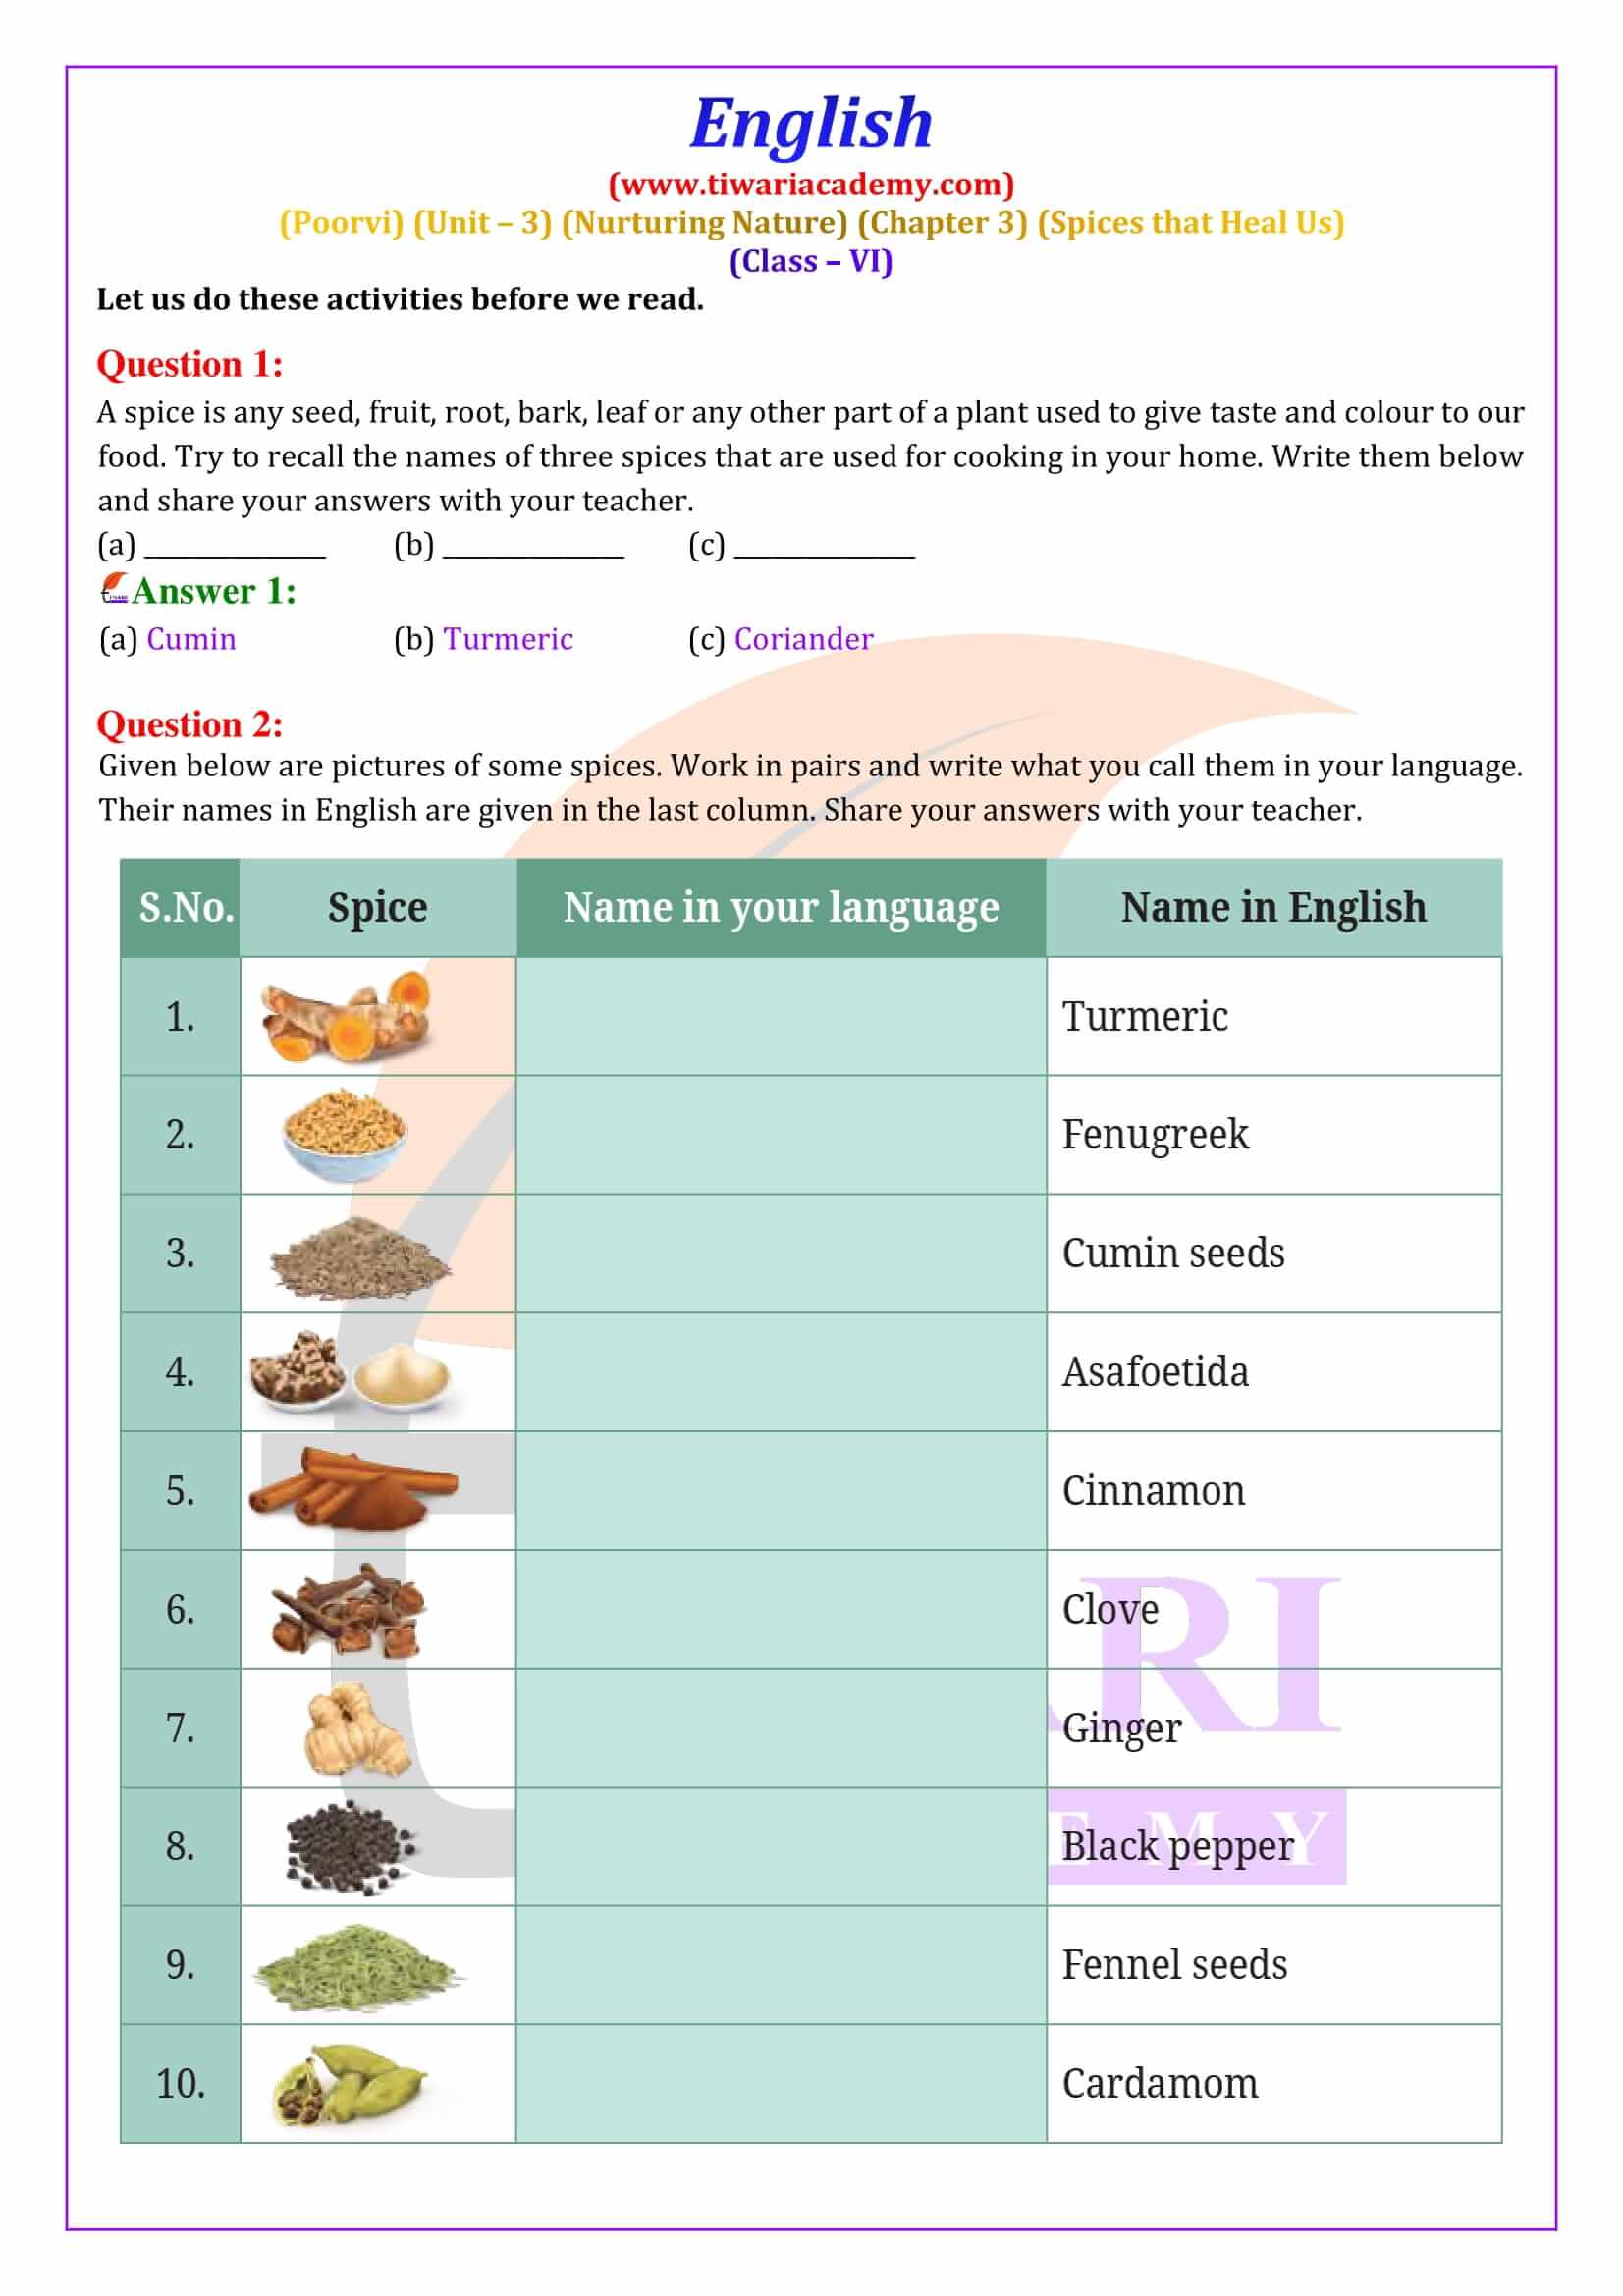 NCERT Solutions for Class 6 English Poorvi Unit 3 Nurturing Nature Chapter 3 Spices that Heal Us